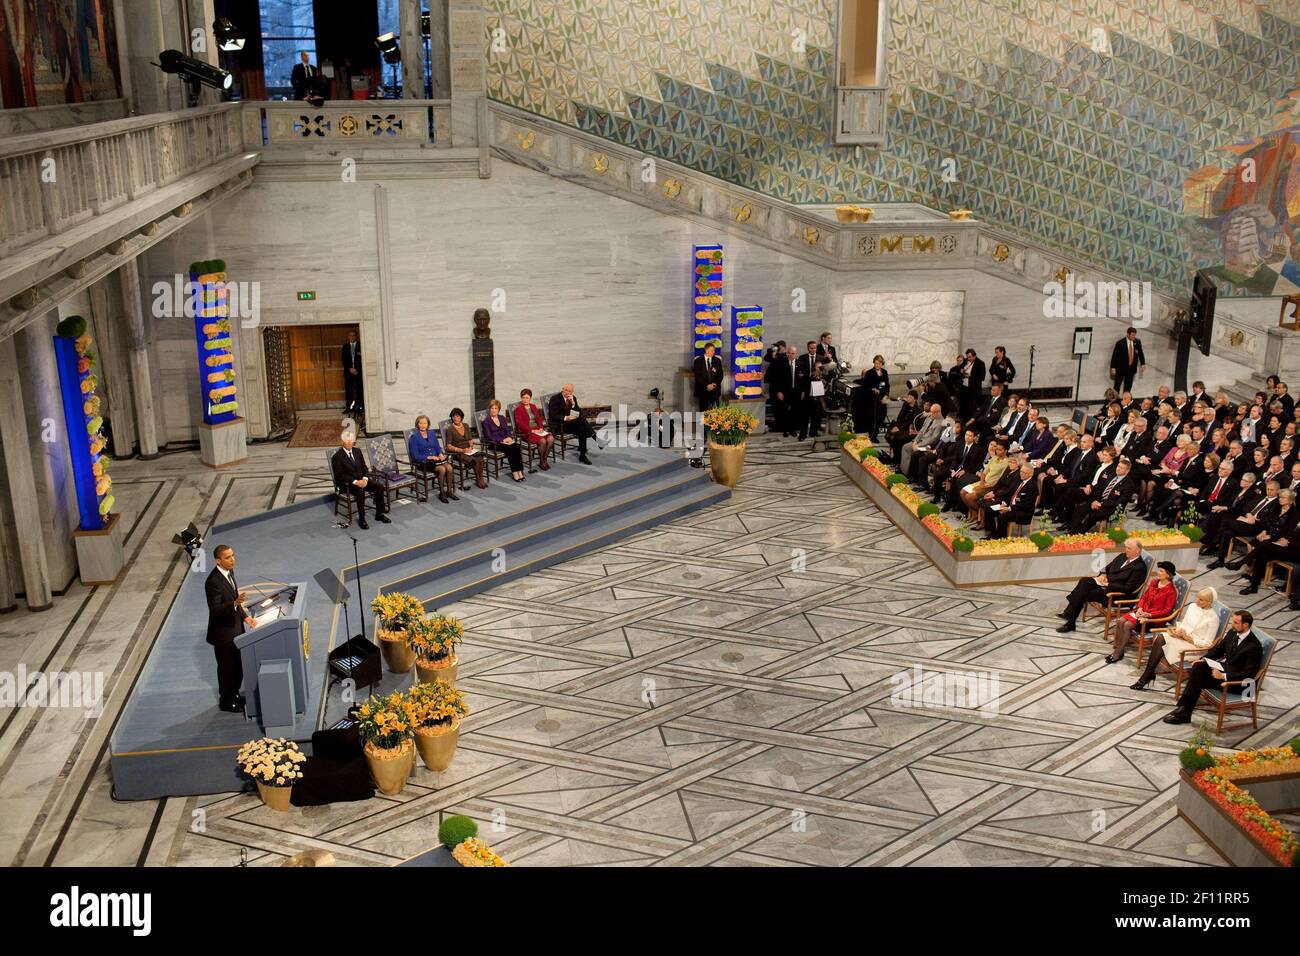 10 December 2009 - Oslo, Norway - President Barack Obama delivers remarks during the Nobel Peace Prize ceremony in Raadhuset Main Hall at Oslo City Hall in Oslo, Norway, Dec. 10, 2009. Photo Credit: Pete Souza / White House/Sipa Press This official White House photograph is being made available only for publication by news organizations and/or for personal use printing by the subject(s) of the photograph. The photograph may not be manipulated in any way and may not be used in commercial or political materials, advertisements, emails, products, promotions that in any way suggests approval or en Stock Photo